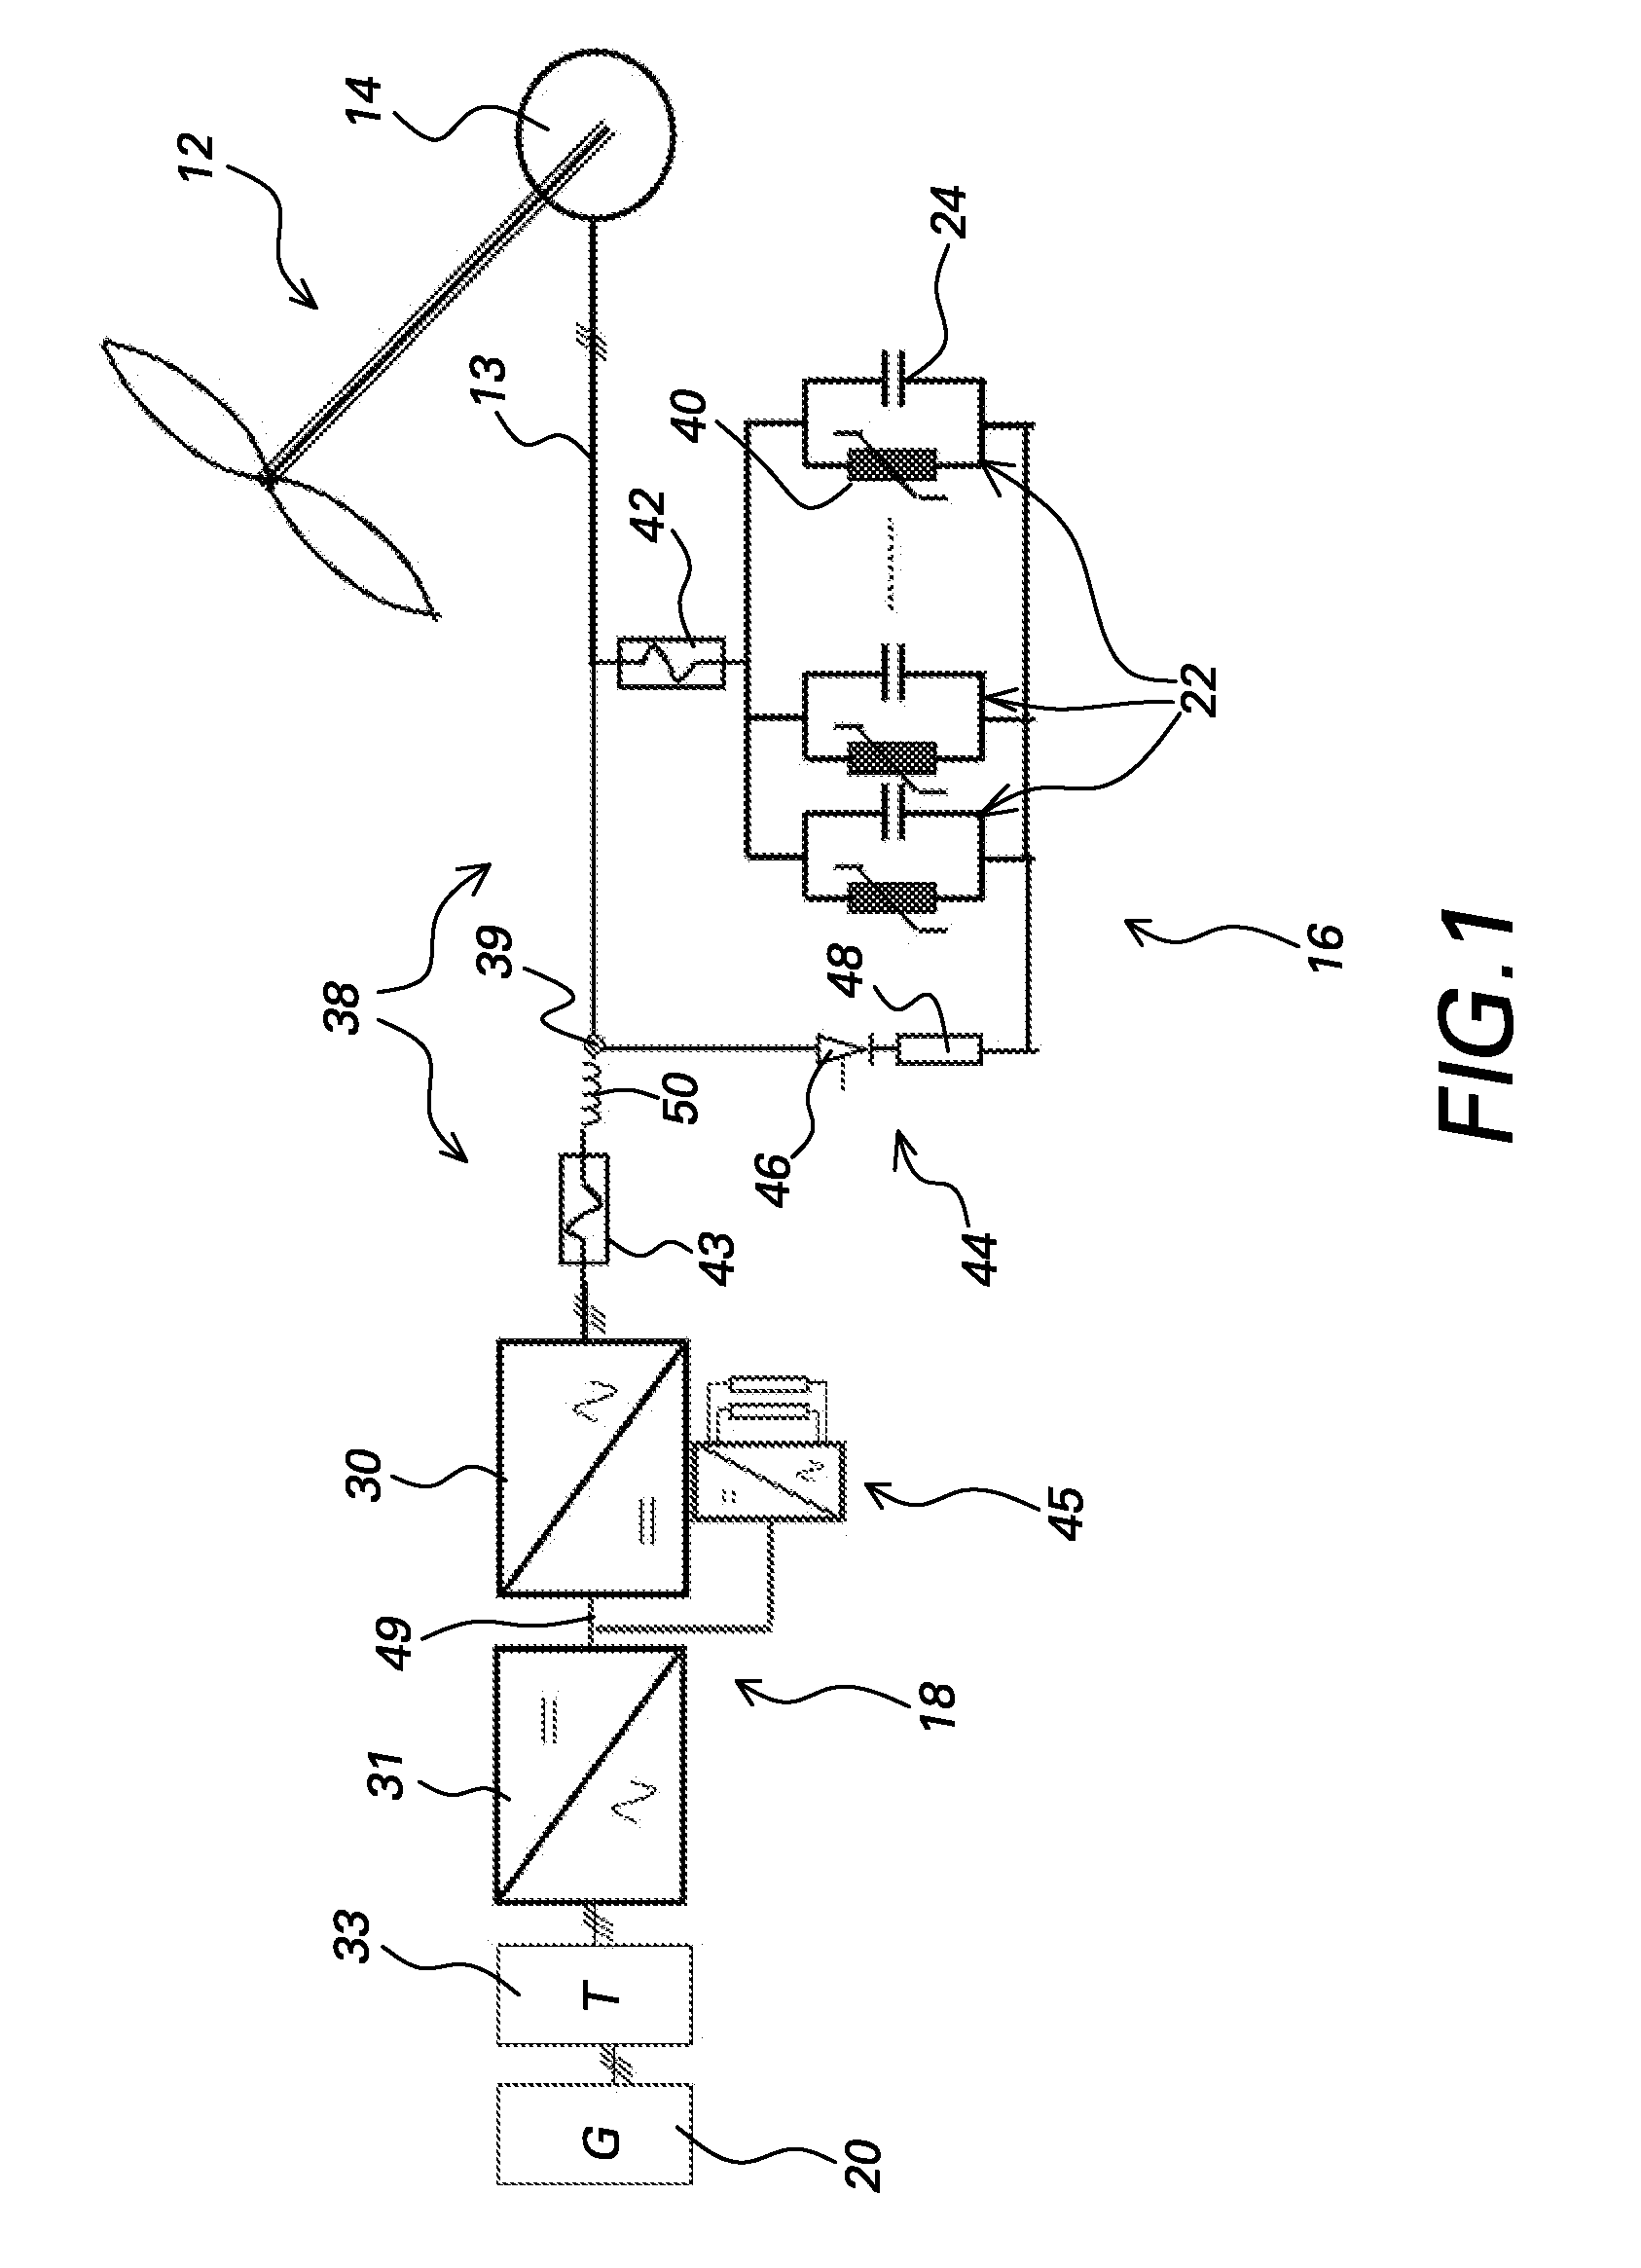 Electric power generation with magnetically geared machine